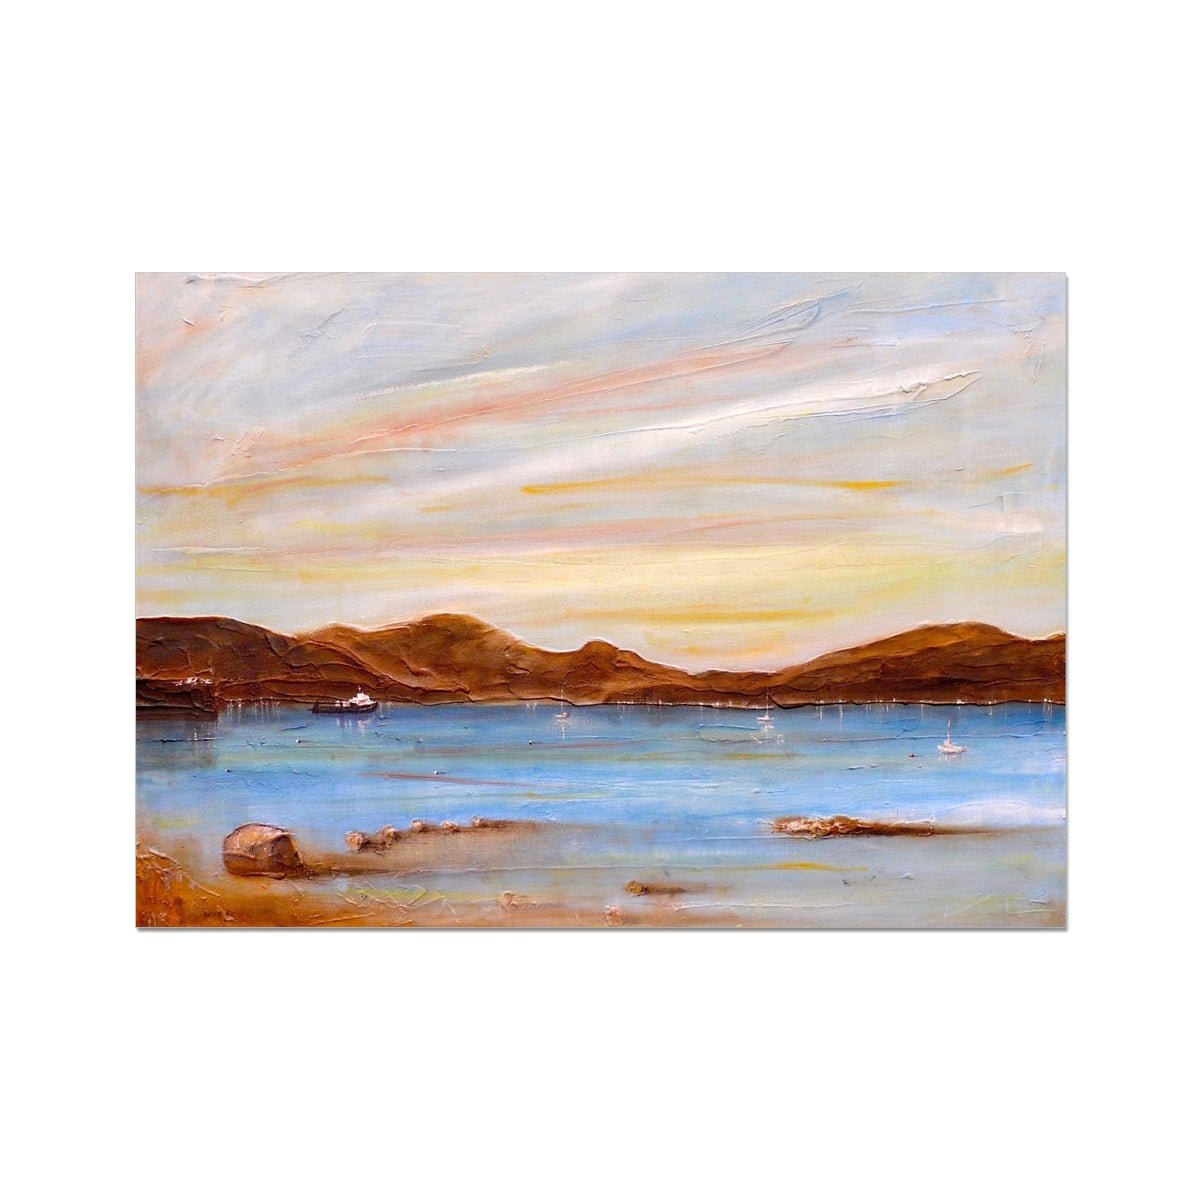 The Last Ferry To Dunoon Painting | Fine Art Prints From Scotland-Unframed Prints-River Clyde Art Gallery-A2 Landscape-Paintings, Prints, Homeware, Art Gifts From Scotland By Scottish Artist Kevin Hunter